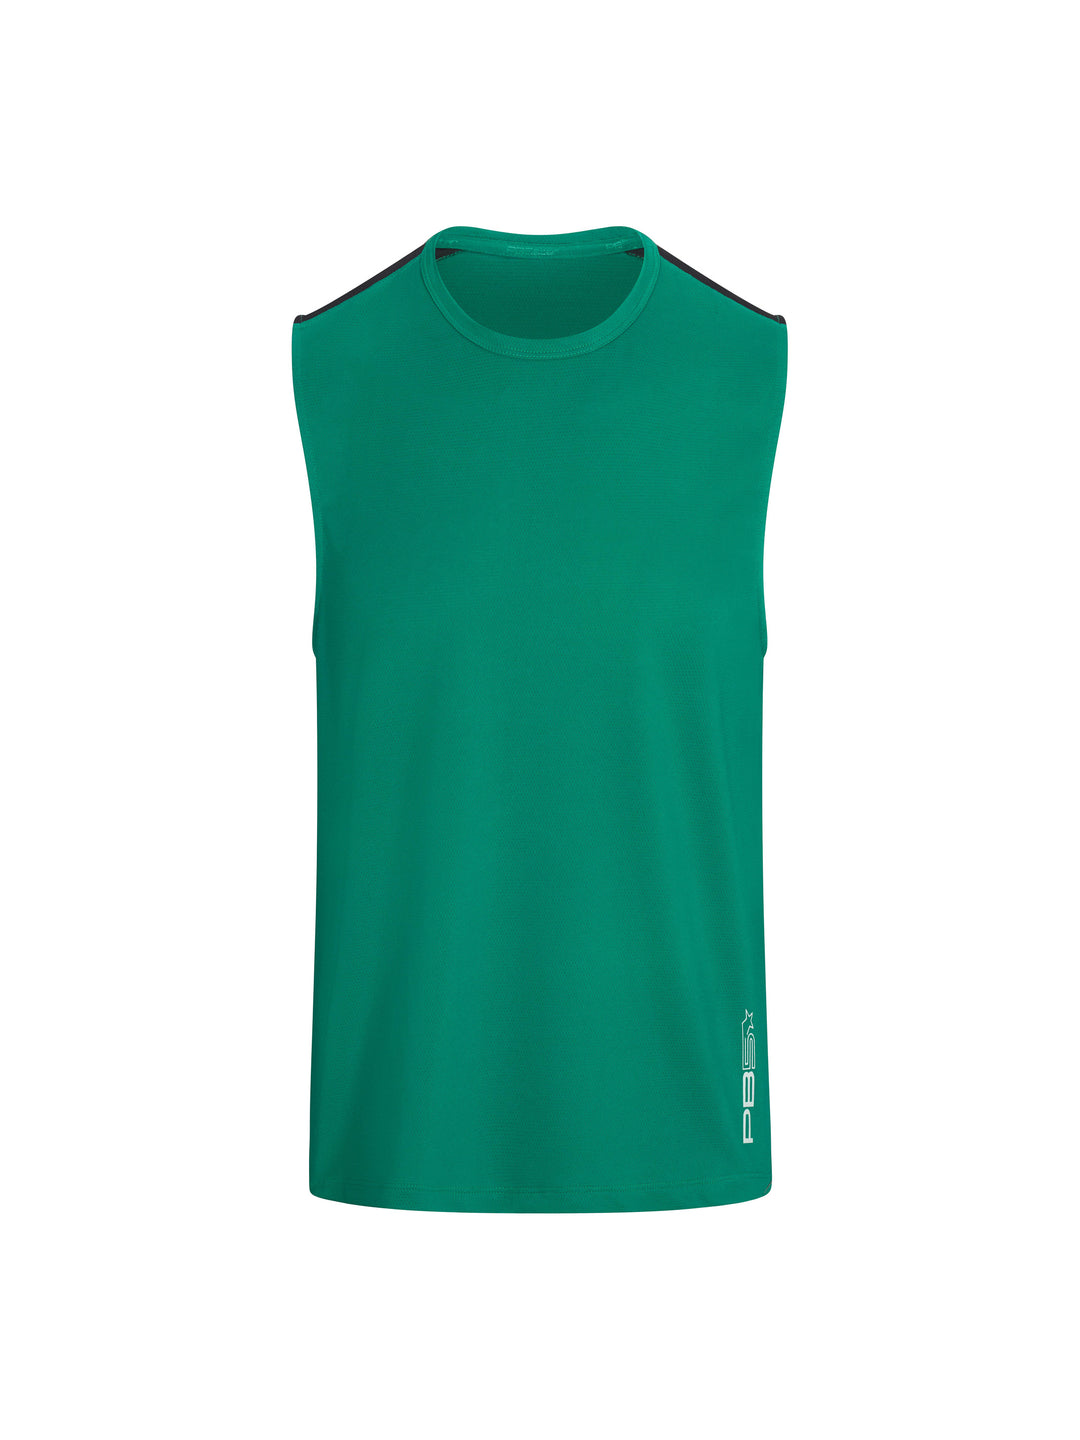 Men's Vented Sleeveless Tee front view in jade. Logo on lower left side seam.